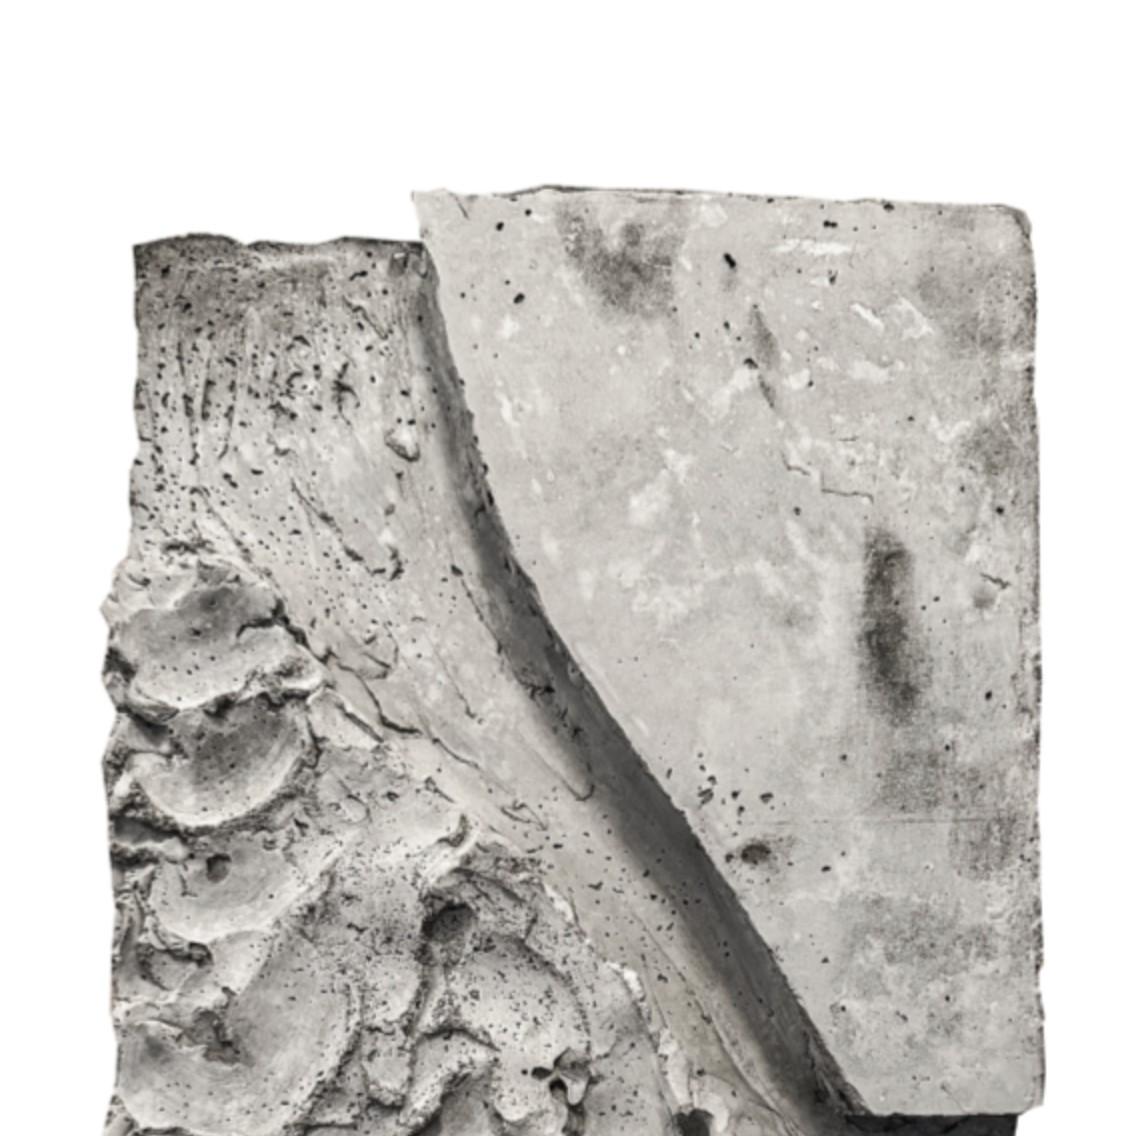 Relief Sculpture by Alexandra Madirazza
Dimensions: W 60 x D 3 x H 90 cm (These are approximate measurements)
Materials: Concrete

Alexandra is an architect, but for the past 5 years she has been self-employed with the company Atelier

Madirazza,